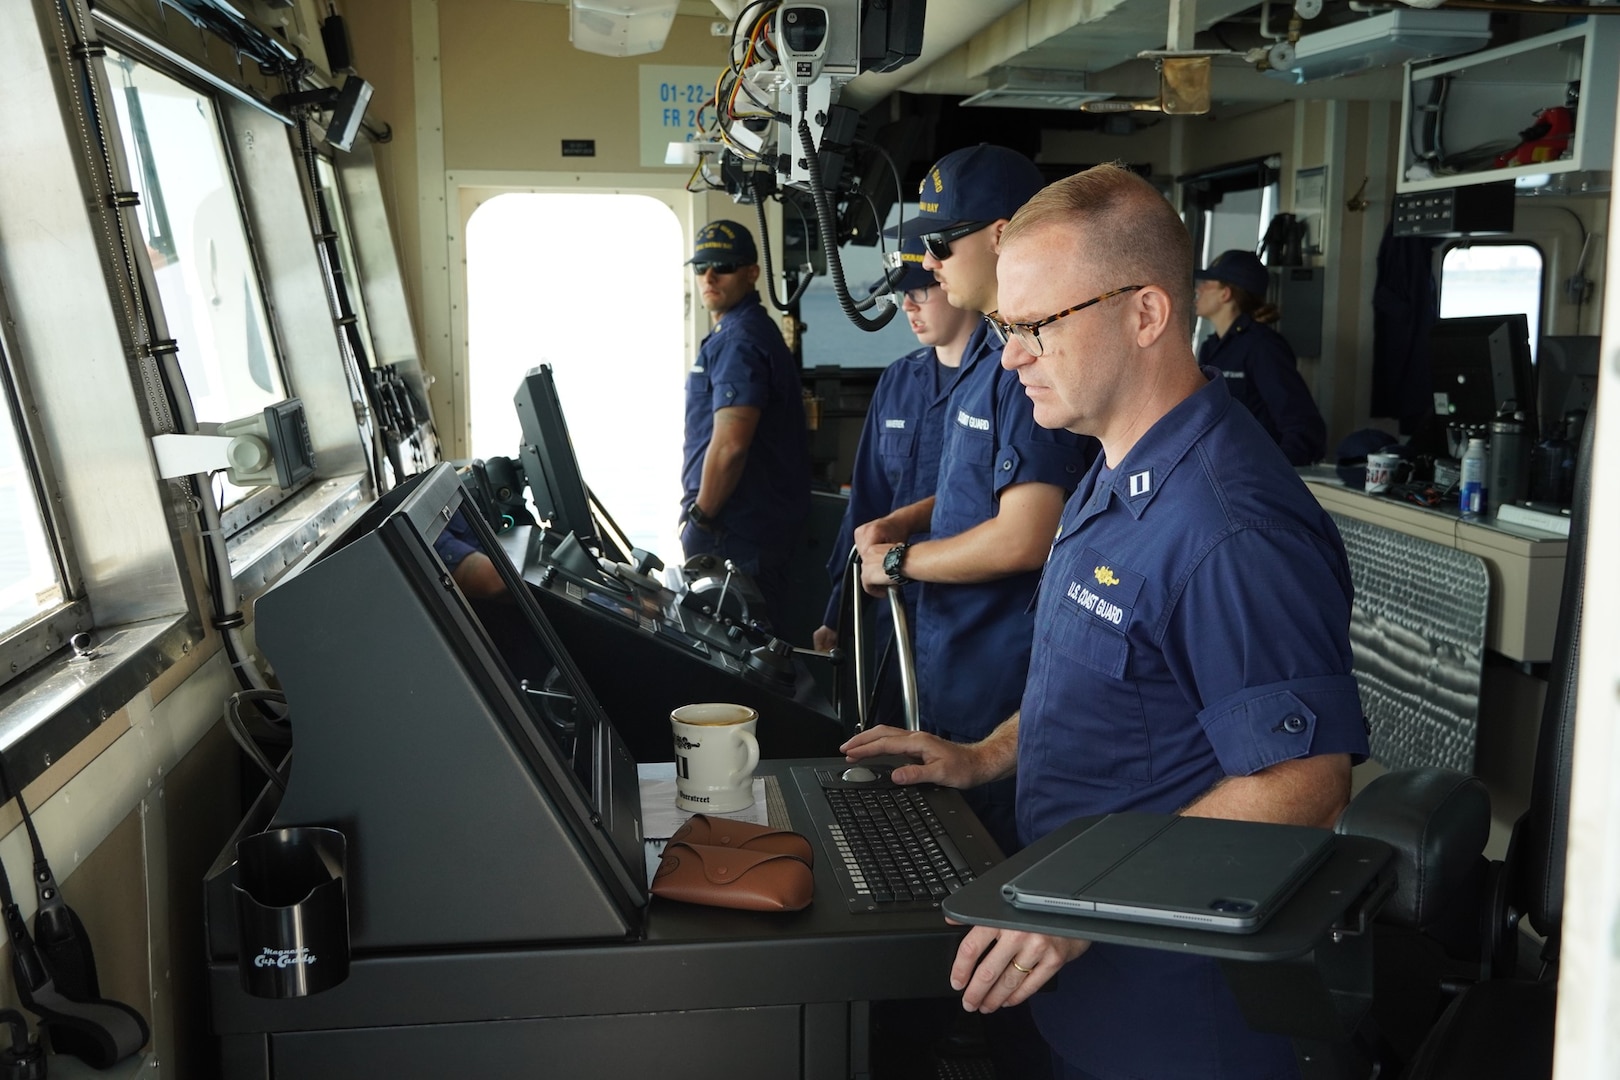 Lt. Michael Overstreet and Coast Guard personnel at the controls of United States Coast Guard Cutter Katmai Bay during the 2023 Chicago Yacht Club Race to Mackinac. (U.S. Coast Guard Auxiliary photo courtesy of John Saran, Auxiliary Public Affairs Specialist 1)